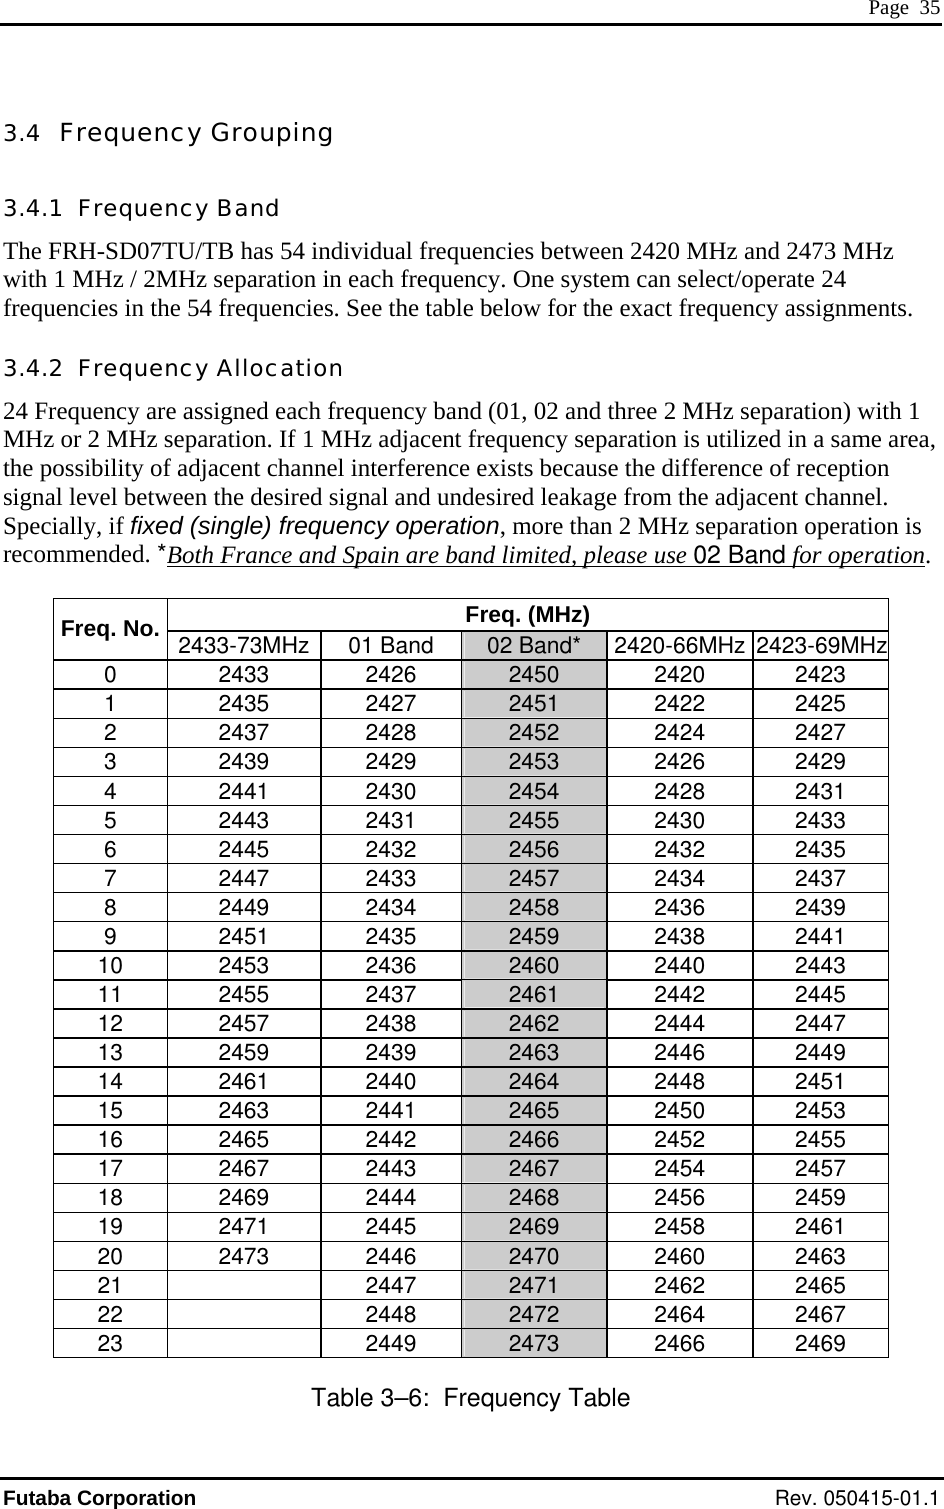  Page  35 3.4  Frequency Grouping 3.4.1  Frequency Band The FRH-SD07TU/TB has 54 individual frequencies between 2420 MHz and 2473 MHz with 1 MHz / 2MHz separation in each frequency. One system can select/operate 24 frequencies in the 54 frequencies. See the table below for the exact frequency assignments. 3.4.2  Frequency Allocation 24 Frequency are assigned each frequency band (01, 02 and three 2 MHz separation) with 1 MHz or 2 MHz separation. If 1 MHz adjacent frequency separation is utilized in a same area, the possibility of adjacent channel interference exists because the difference of reception signal level between the desired signal and undesired leakage from the adjacent channel. Specially, if fixed (single) frequency operation, more than 2 MHz separation operation is recommended. *Both France and Spain are band limited, please use 02 Band for operation.  Freq. (MHz) Freq. No.  2433-73MHz 01 Band  02 Band*  2420-66MHz 2423-69MHz0 2433 2426 2450  2420 2423 1 2435 2427 2451  2422 2425 2 2437 2428 2452  2424 2427 3 2439 2429 2453  2426 2429 4 2441 2430 2454  2428 2431 5 2443 2431 2455  2430 2433 6 2445 2432 2456  2432 2435 7 2447 2433 2457  2434 2437 8 2449 2434 2458  2436 2439 9 2451 2435 2459  2438 2441 10 2453 2436 2460  2440 2443 11 2455 2437 2461  2442 2445 12 2457 2438 2462  2444 2447 13 2459 2439 2463  2446 2449 14 2461 2440 2464  2448 2451 15 2463 2441 2465  2450 2453 16 2465 2442 2466  2452 2455 17 2467 2443 2467  2454 2457 18 2469 2444 2468  2456 2459 19 2471 2445 2469  2458 2461 20 2473 2446 2470  2460 2463 21  2447 2471  2462 2465 22  2448 2472  2464 2467 23  2449 2473  2466 2469 Table 3–6:  Frequency Table Futaba Corporation Rev. 050415-01.1 